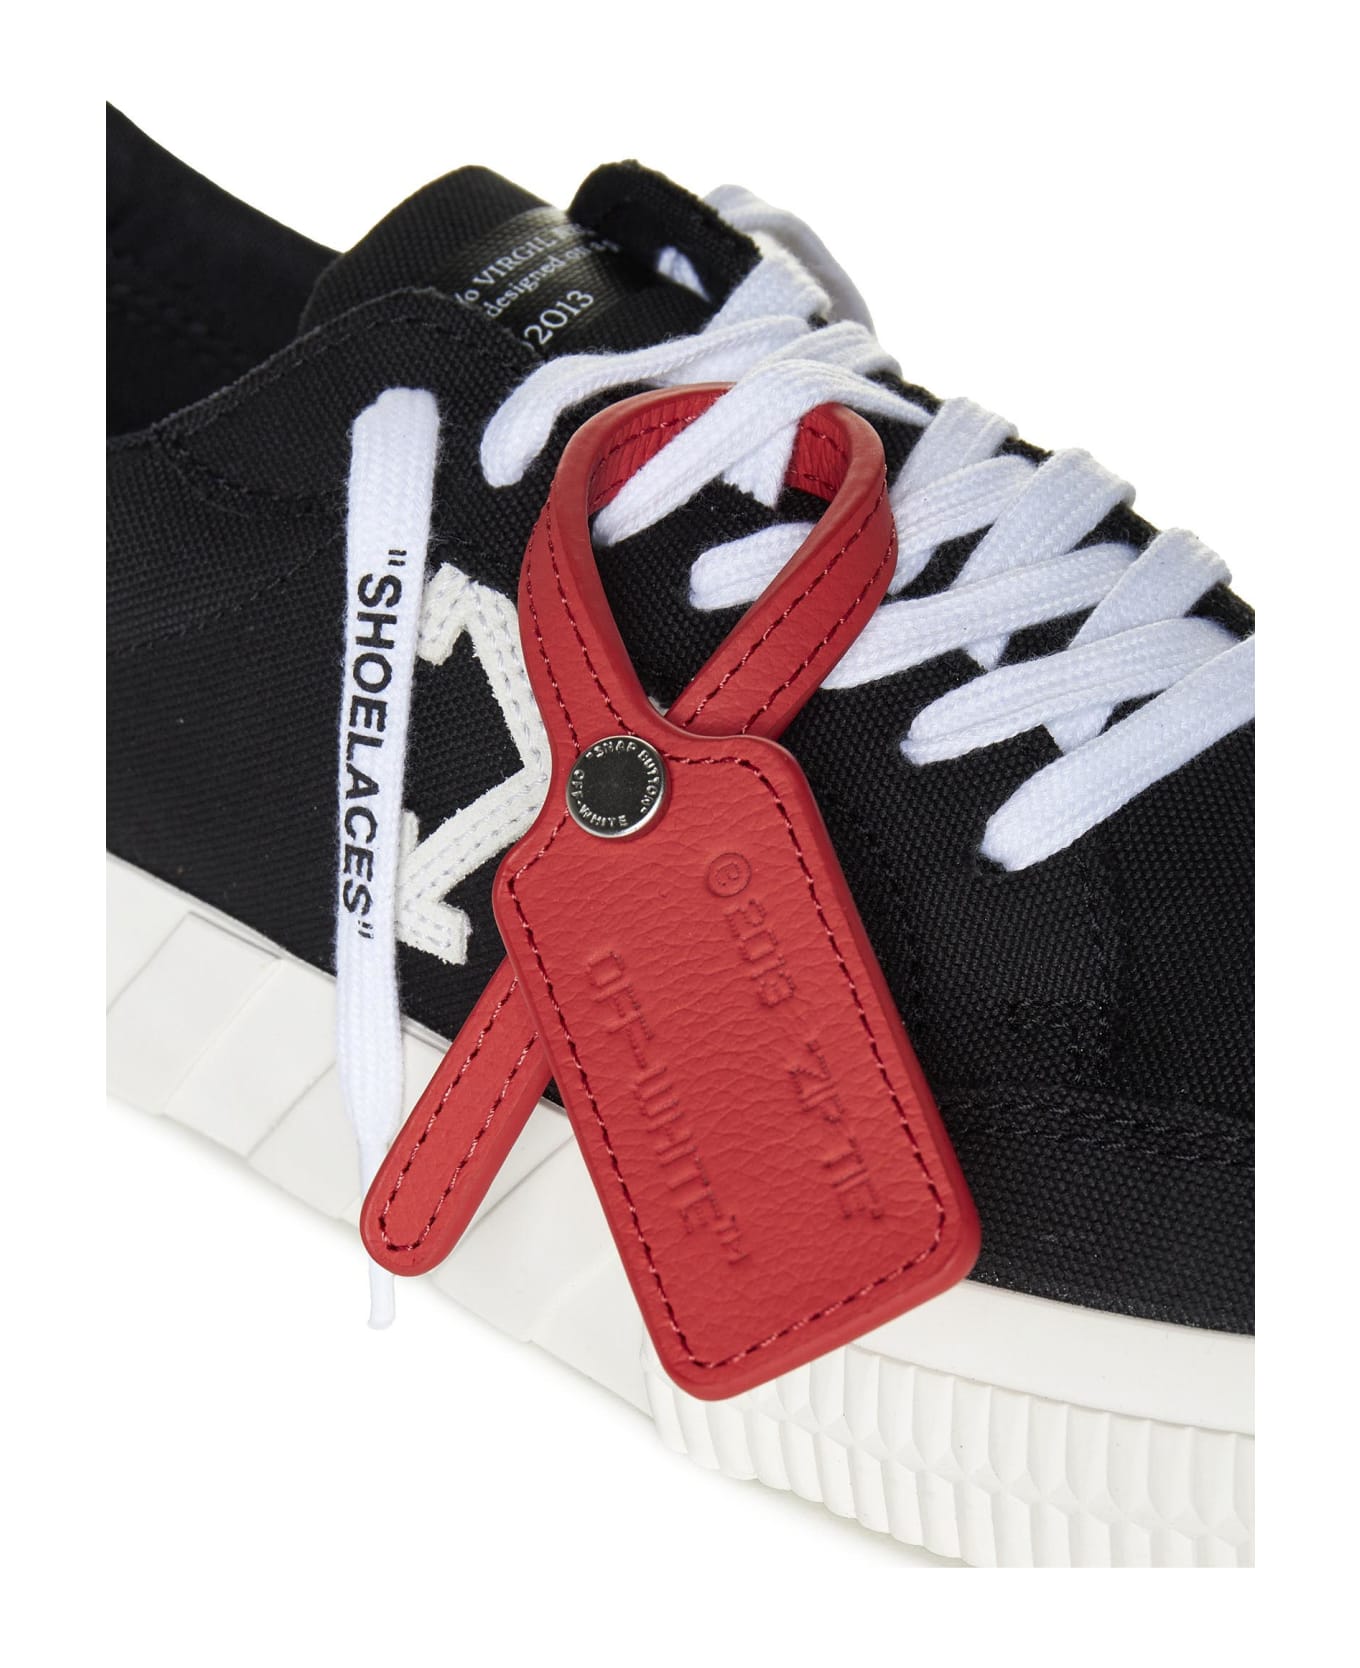 Off-White Low Vulcanized Sneakers - Black white